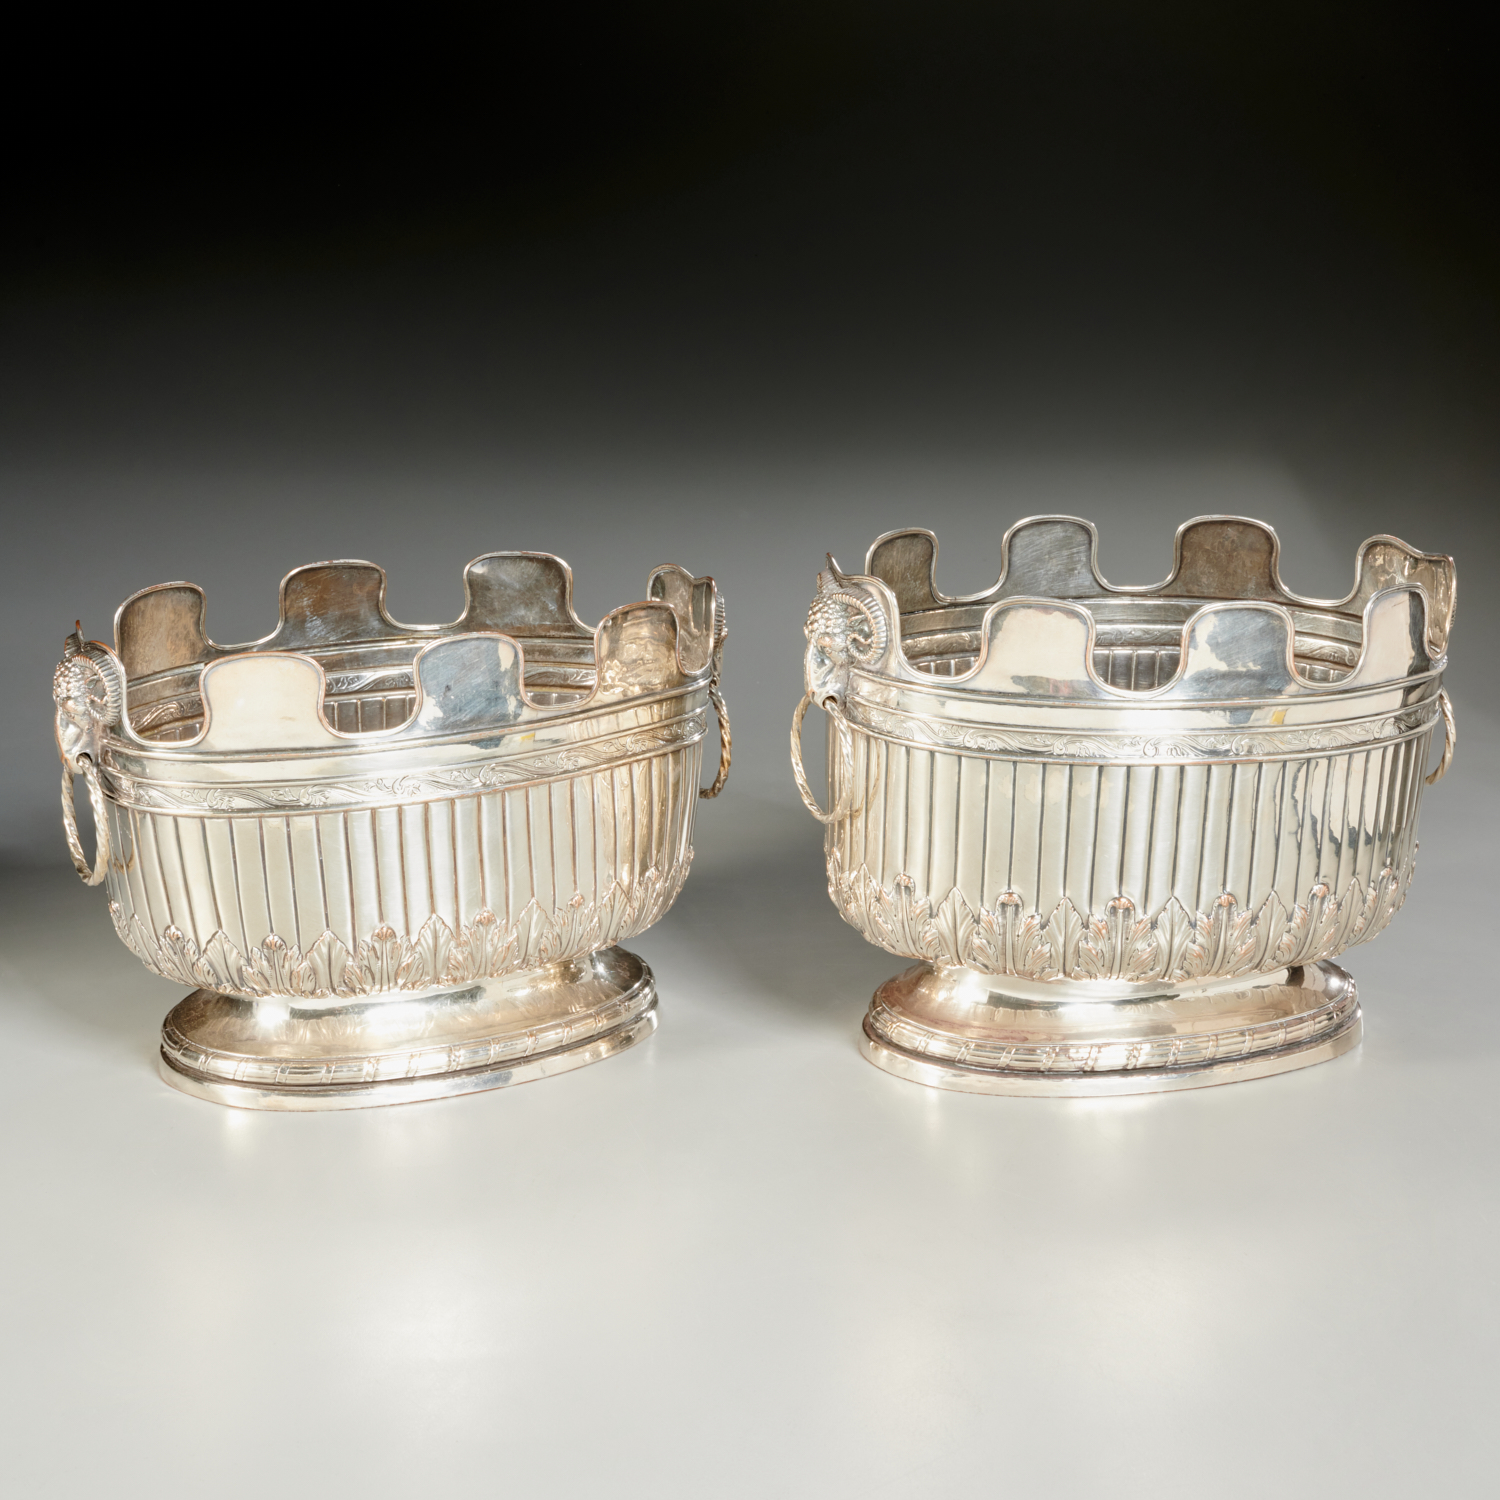 OLD PAIR ENGLISH SILVER PLATE MONTEITH